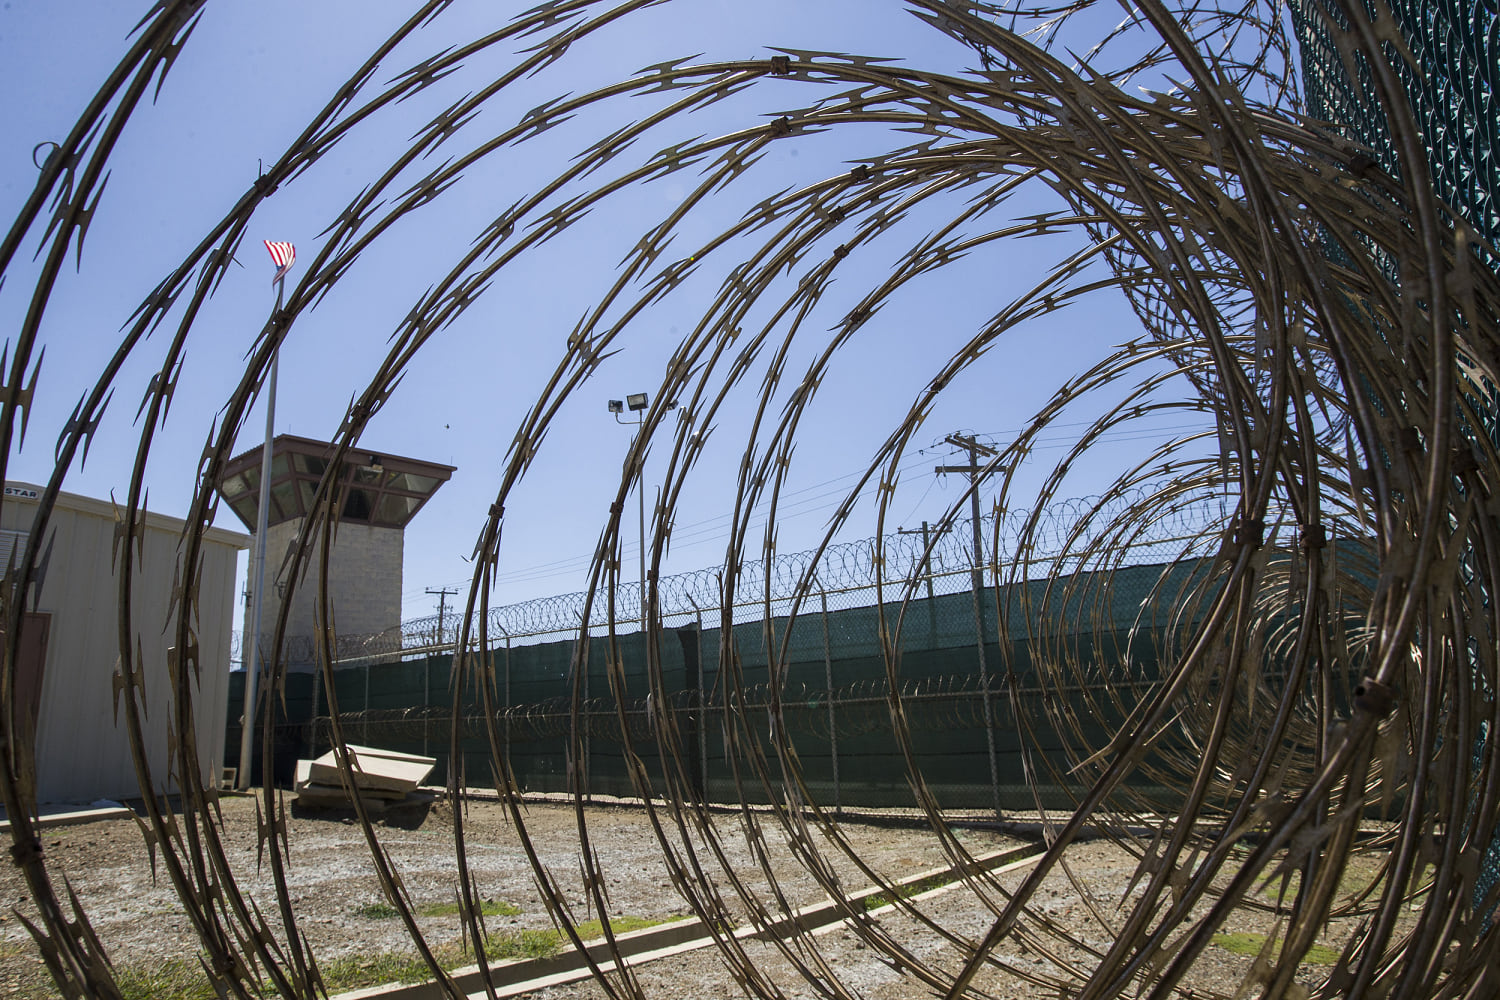 The U.S. was set to move 11 detainees out of Guantanamo. Then politics got in the way, some officials say.